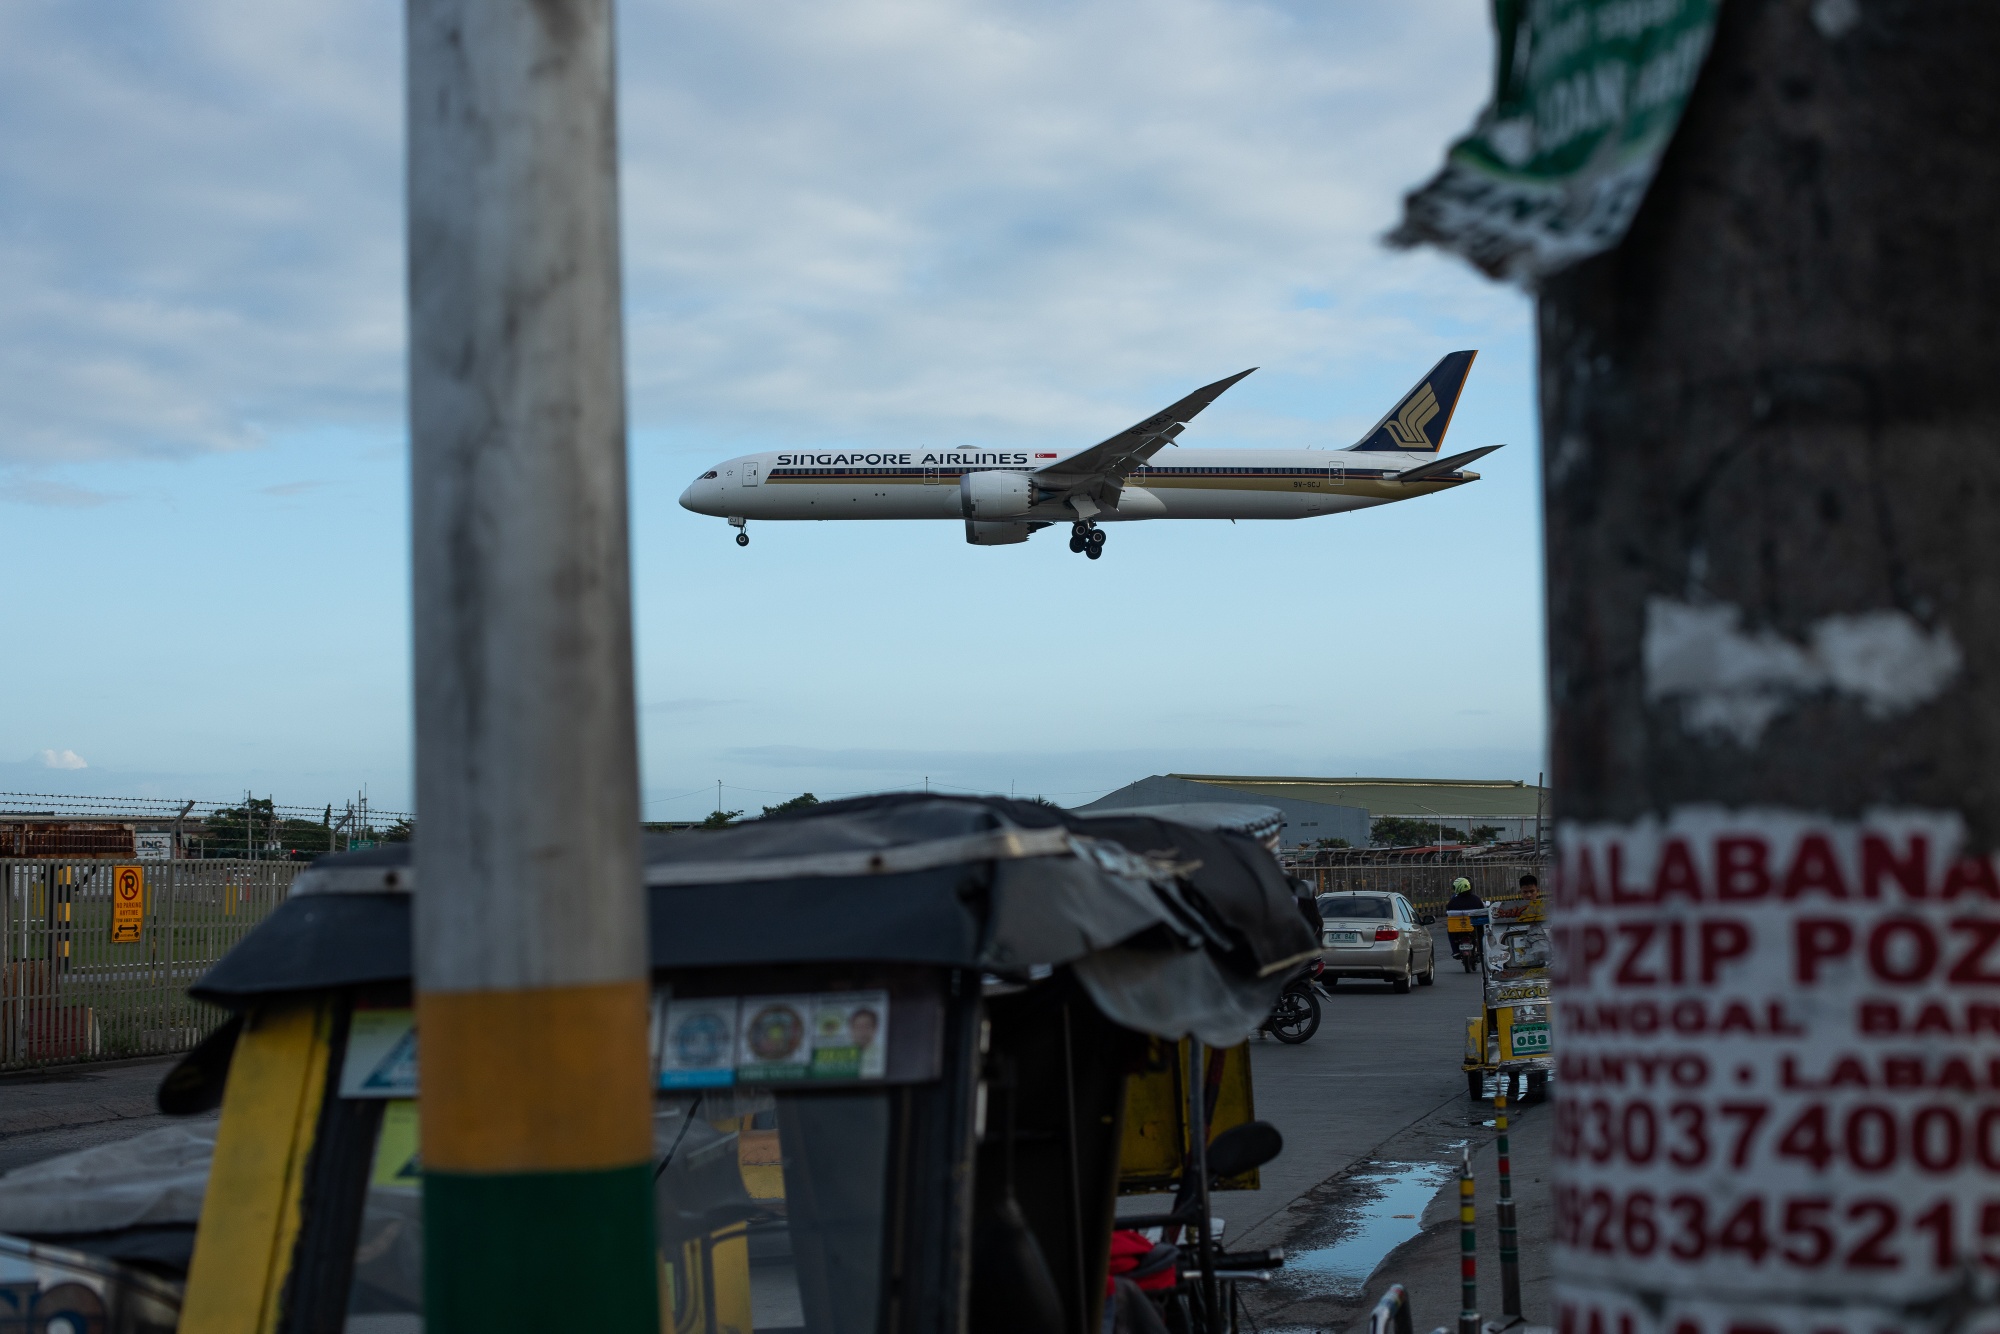 A Singapore Airlines Ltd. aircraft prepares to land at Ninoy Aquino International Airport in Manila, the Philippines.